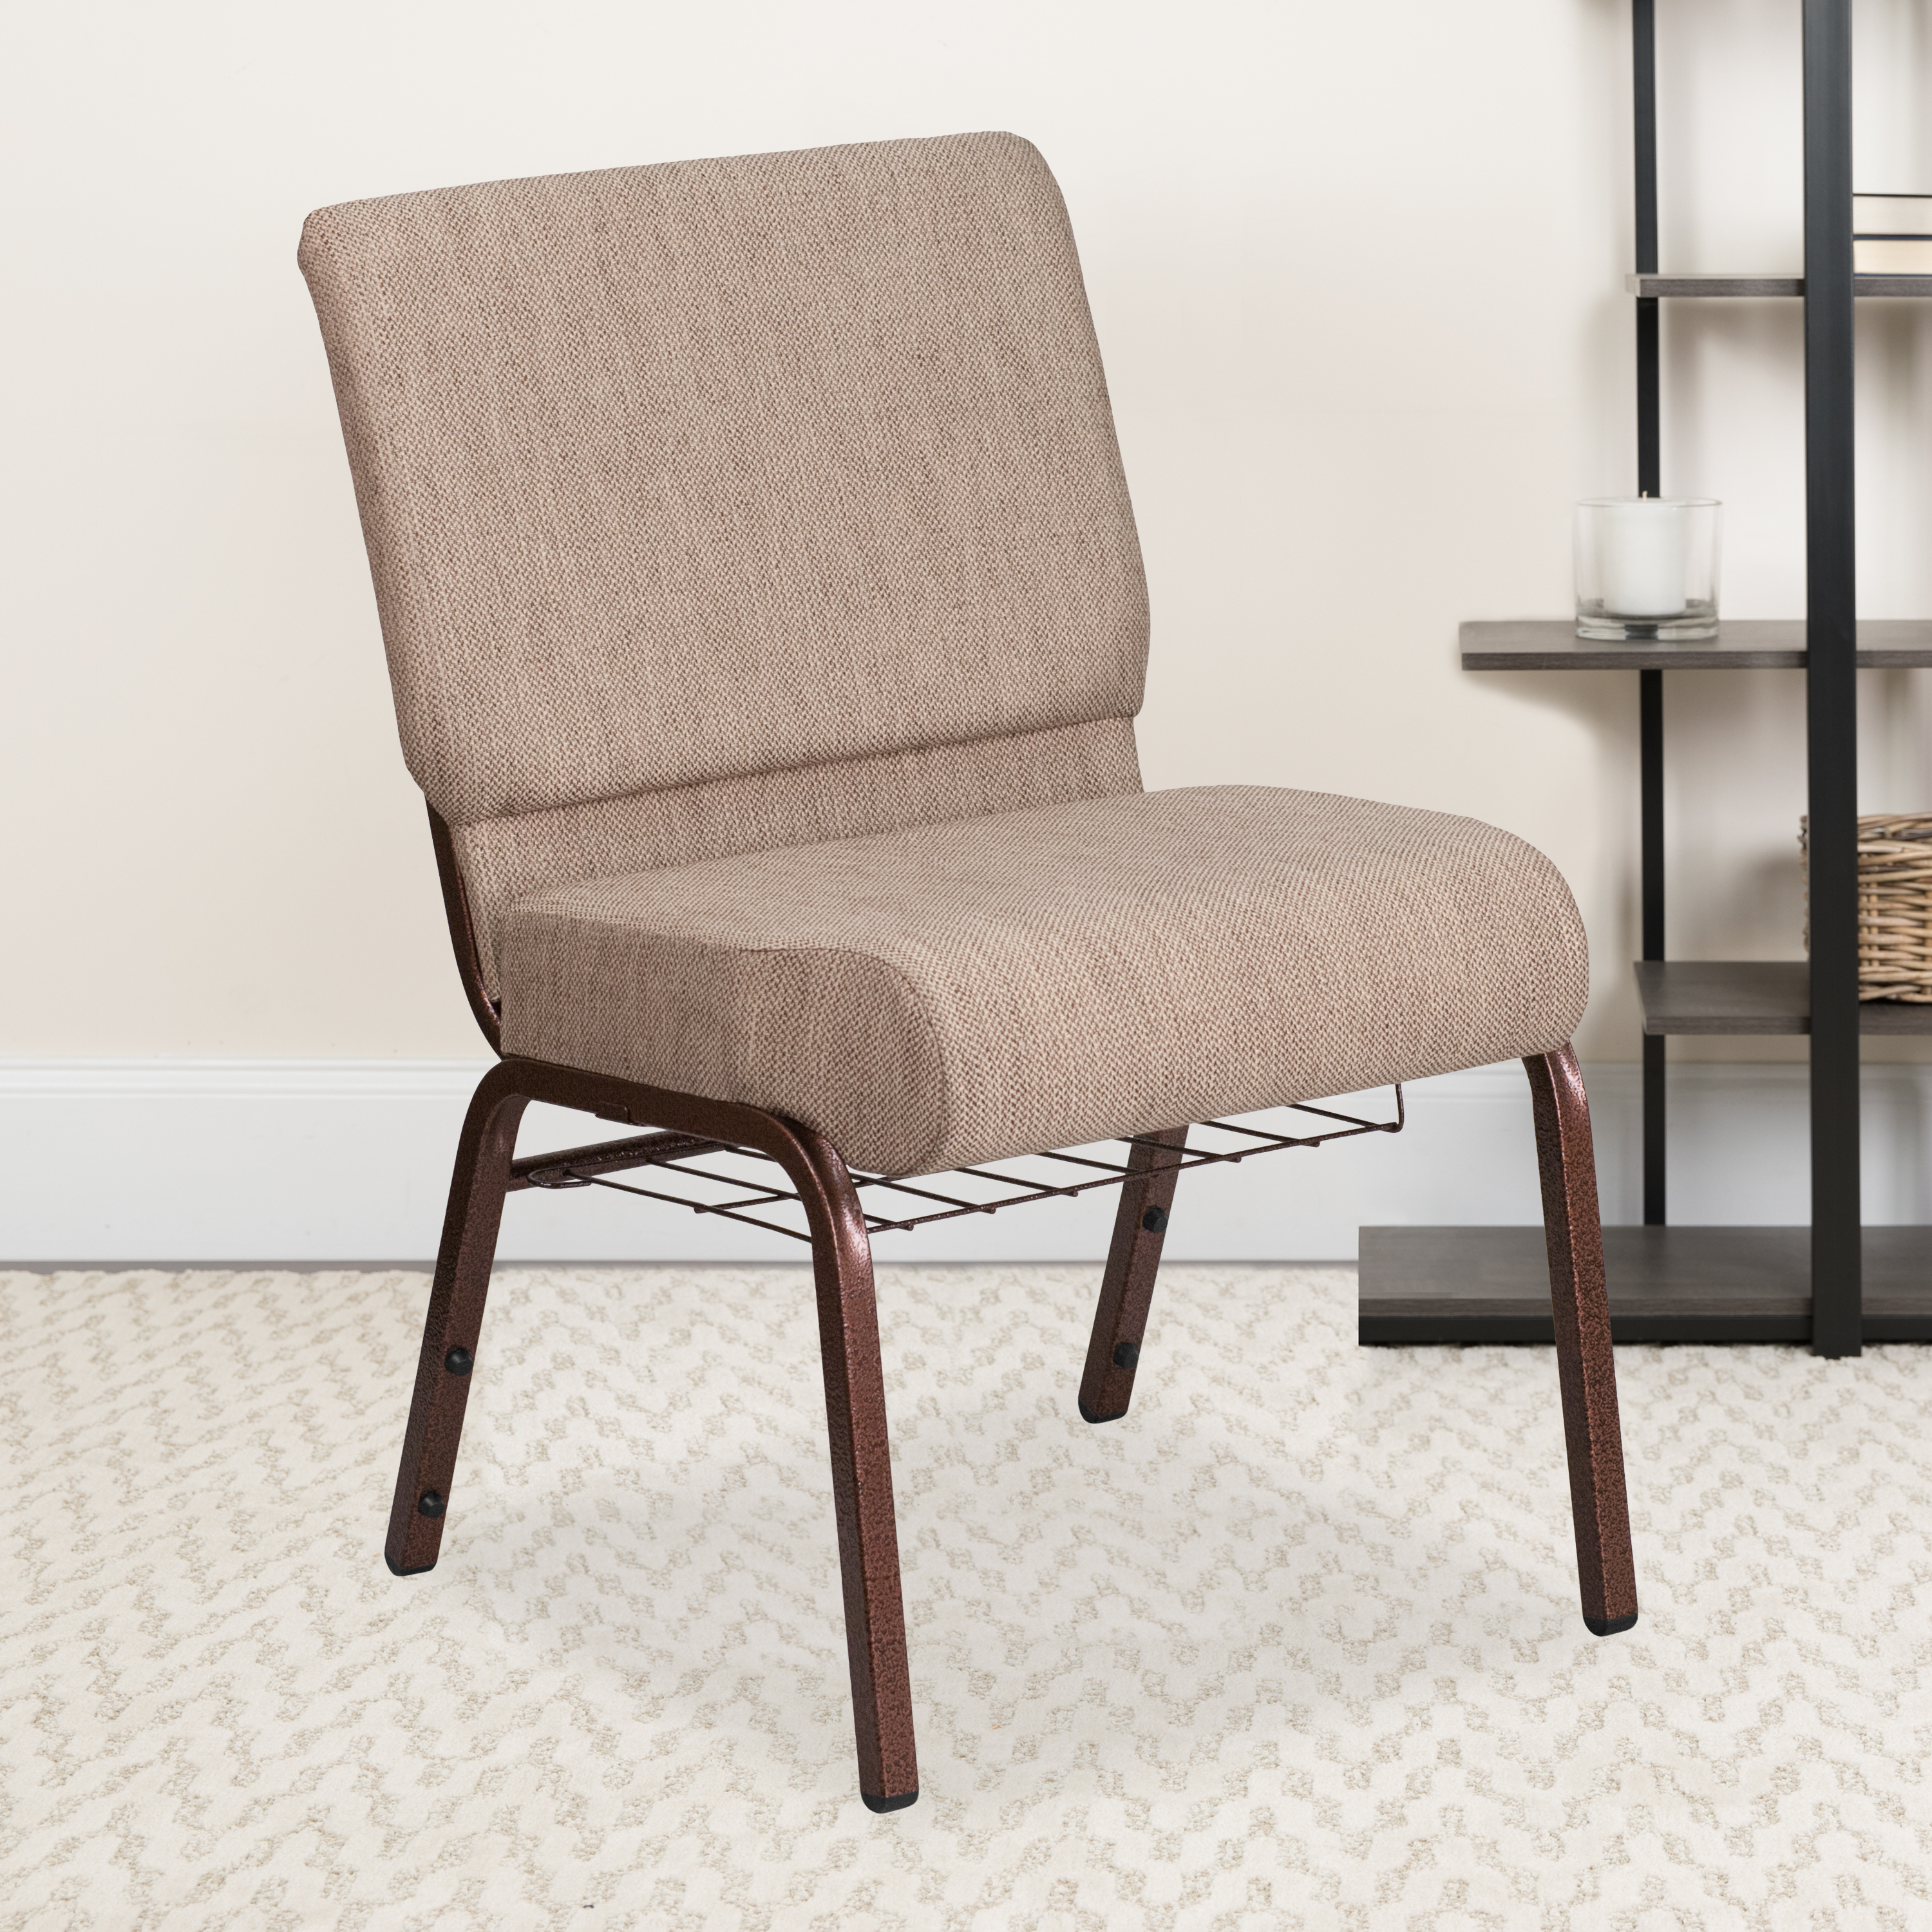 Flash Furniture HERCULES Series 21''W Church Chair in Beige Fabric with Book Rack - Copper Vein Frame - image 1 of 11